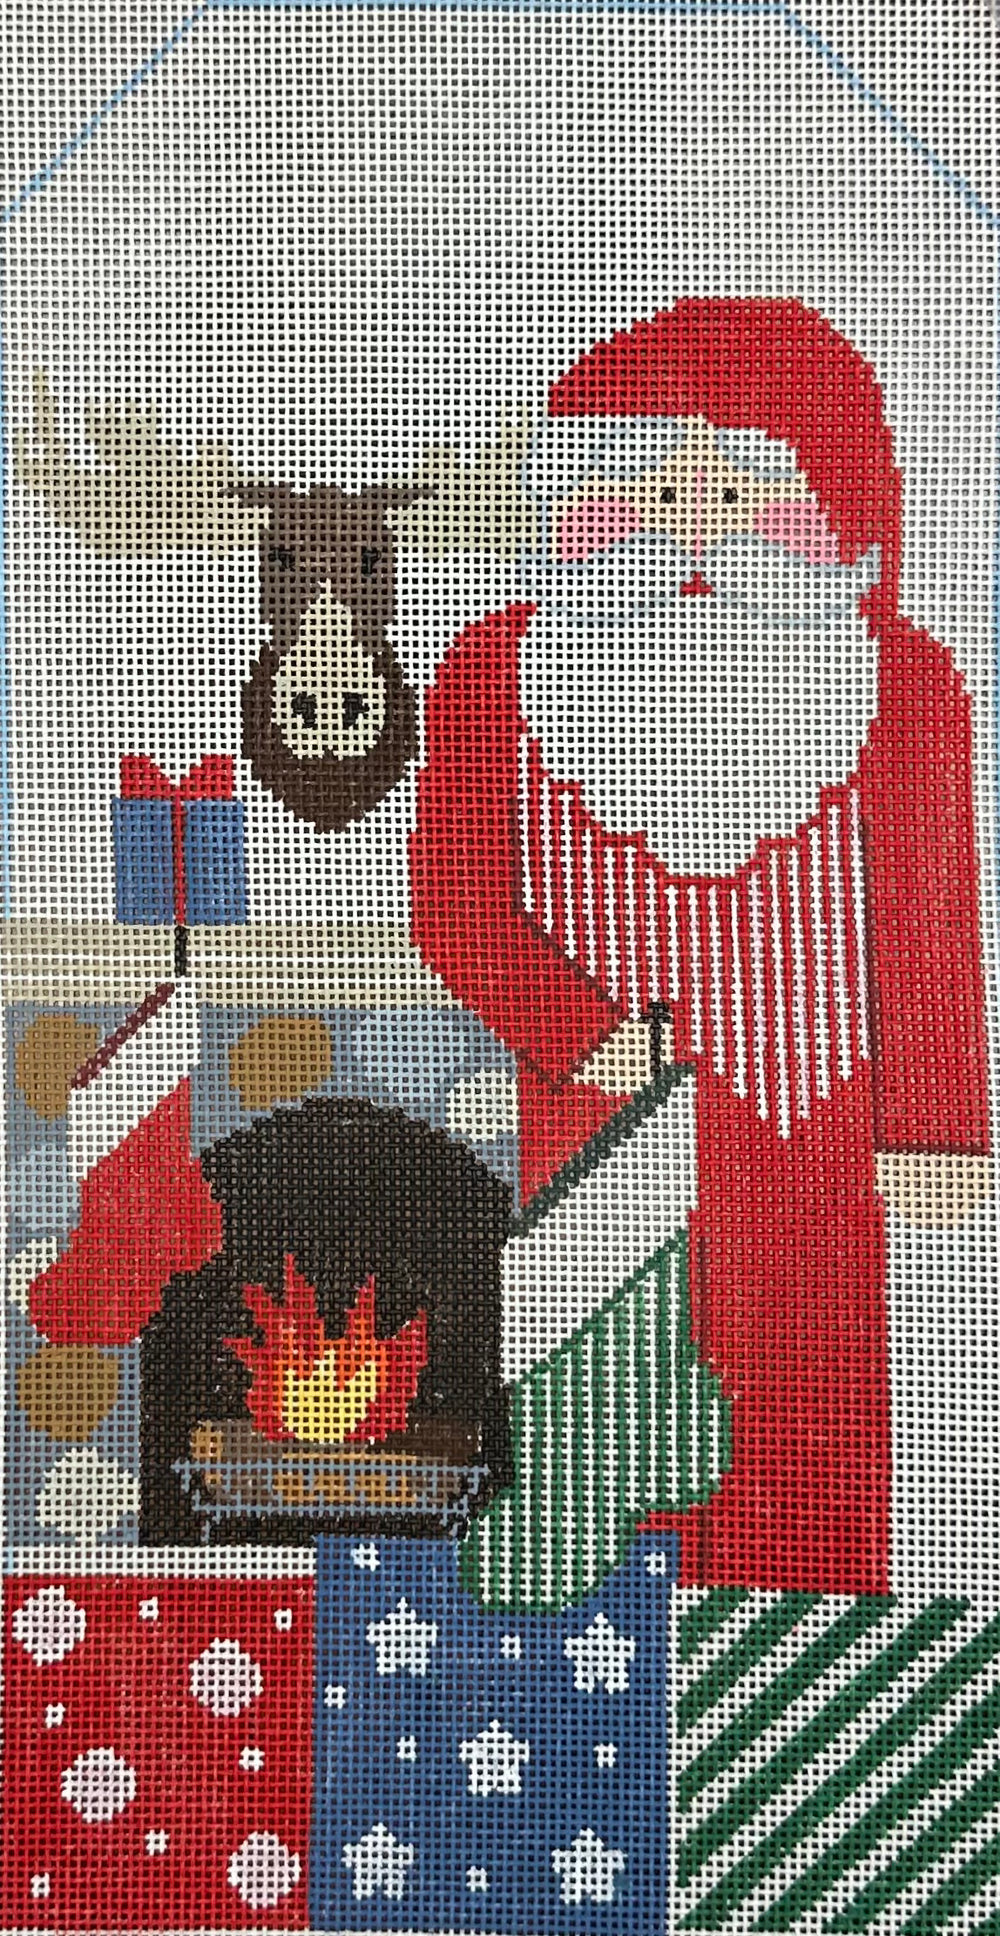 Stockings Santa with stitch guide